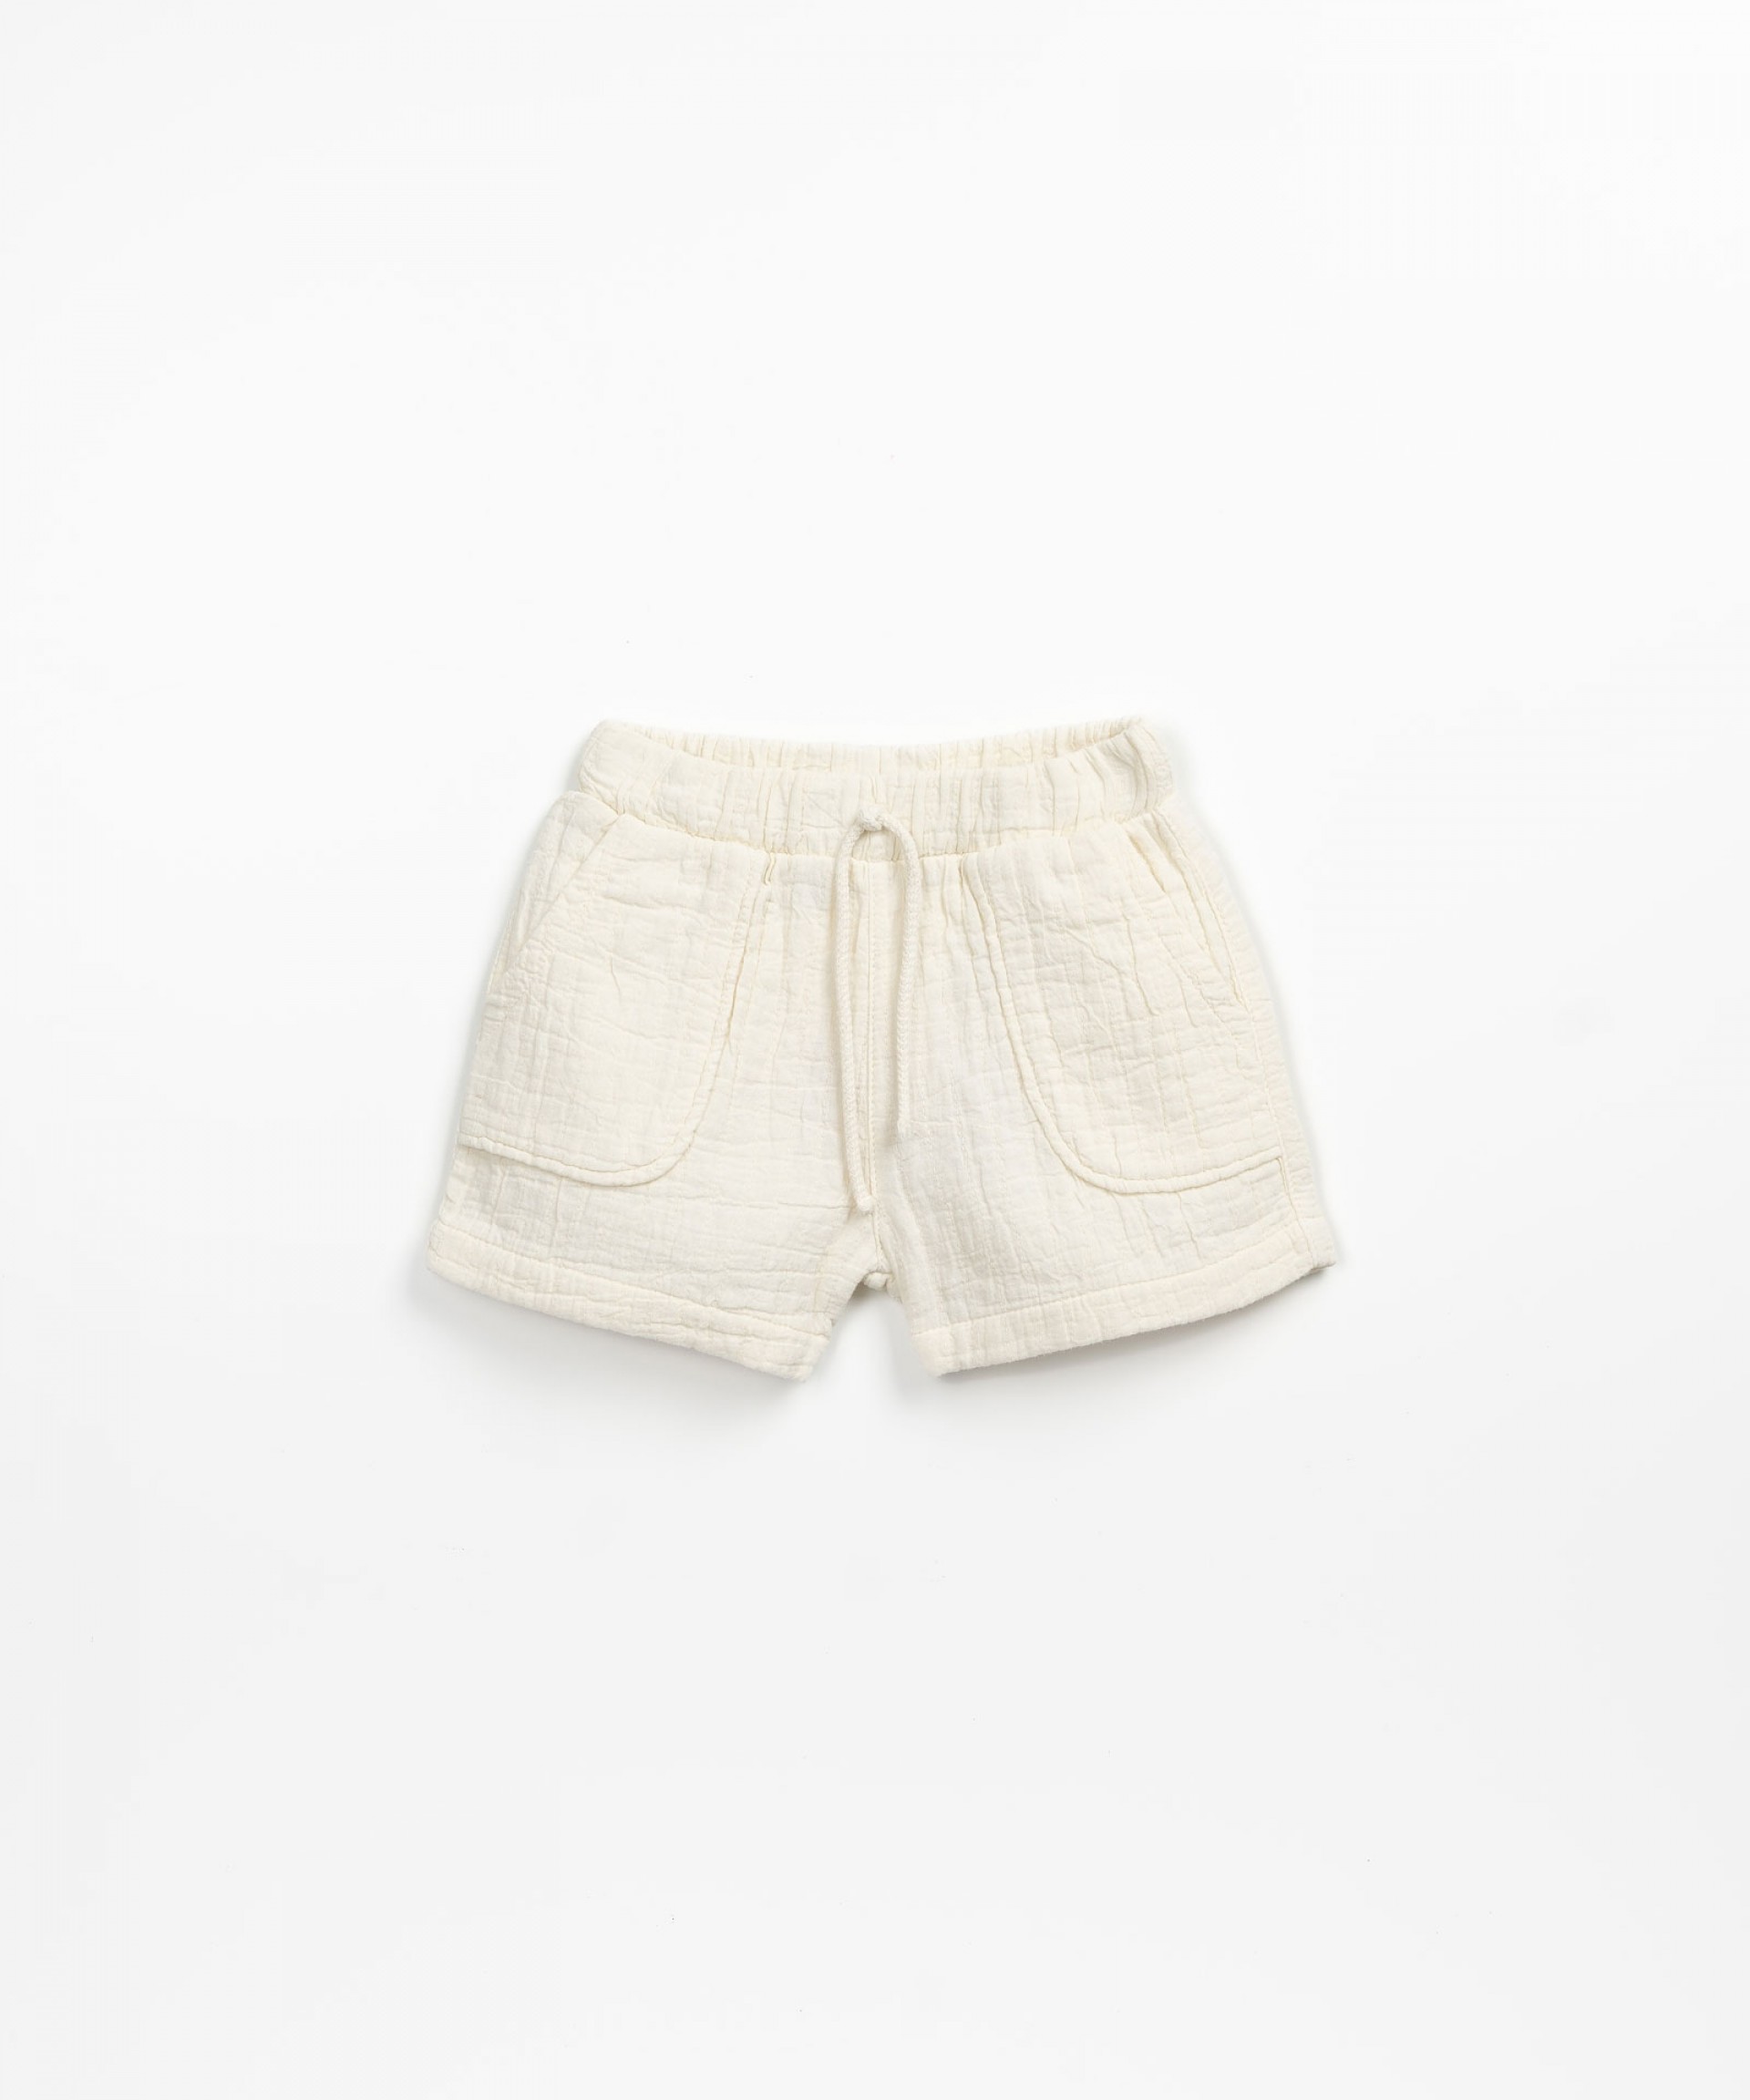 100% cotton baby boy shorts with front pockets